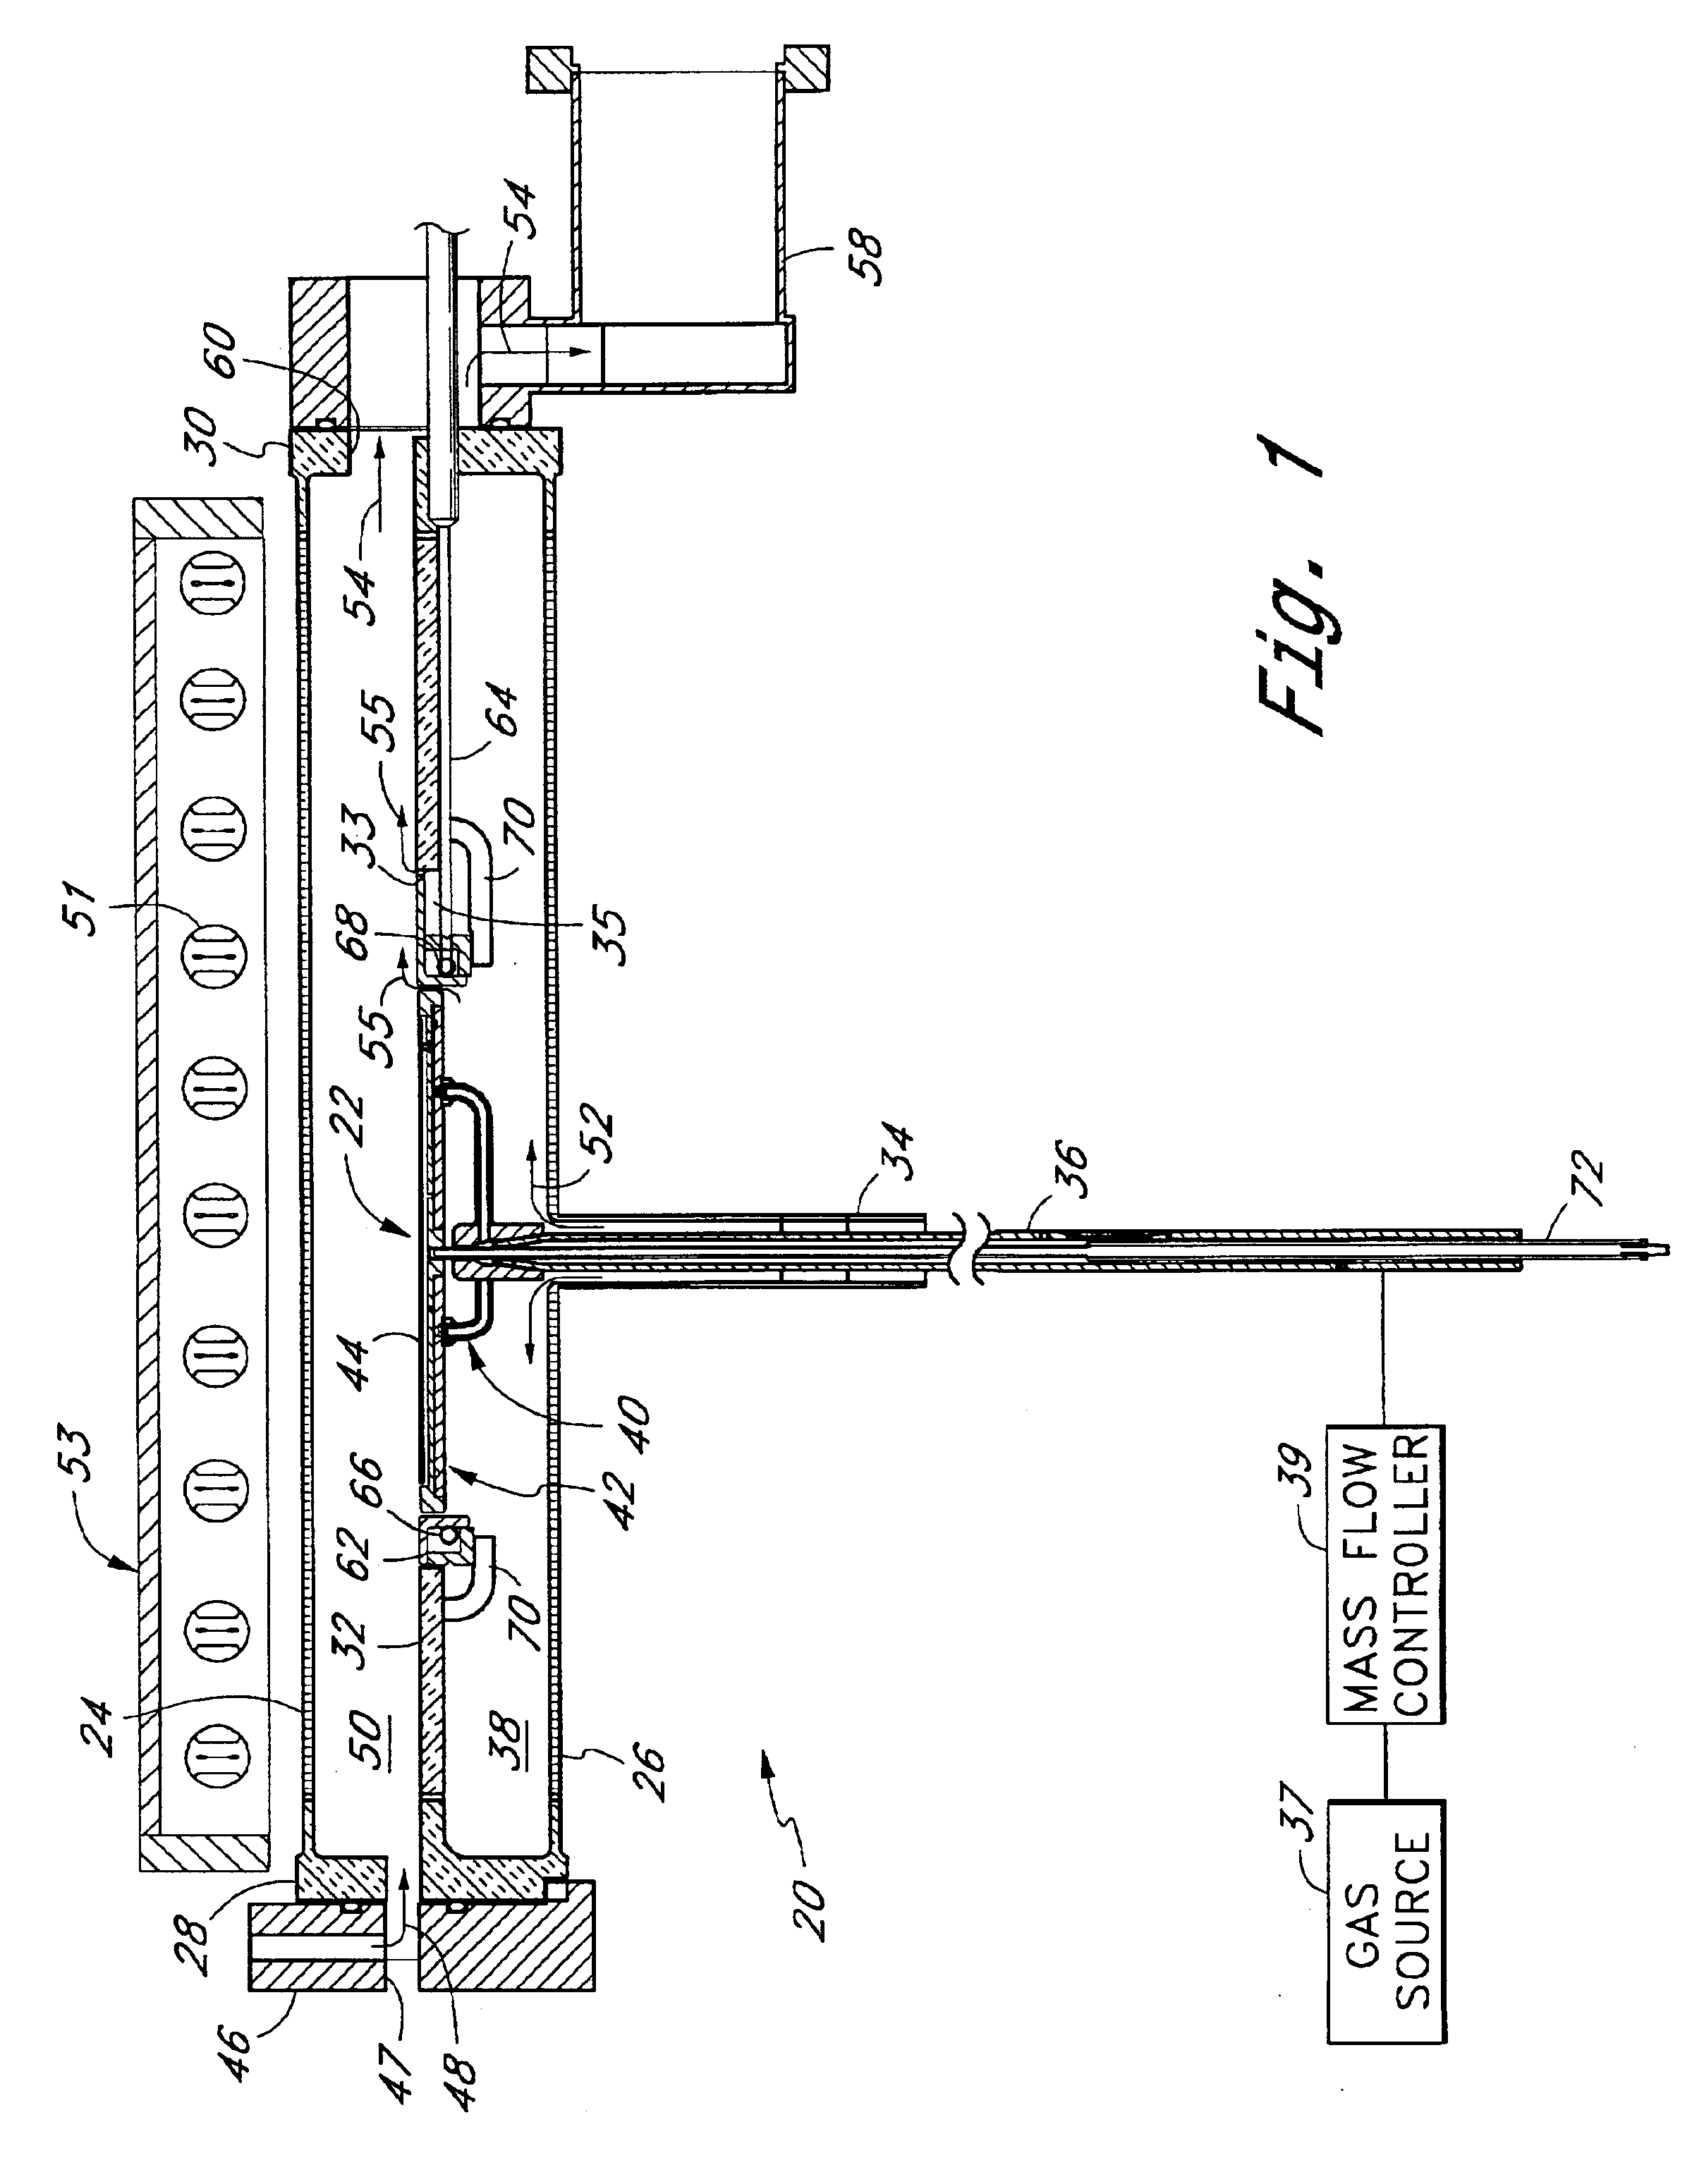 Method of loading a wafer onto a wafer holder to reduce thermal shock